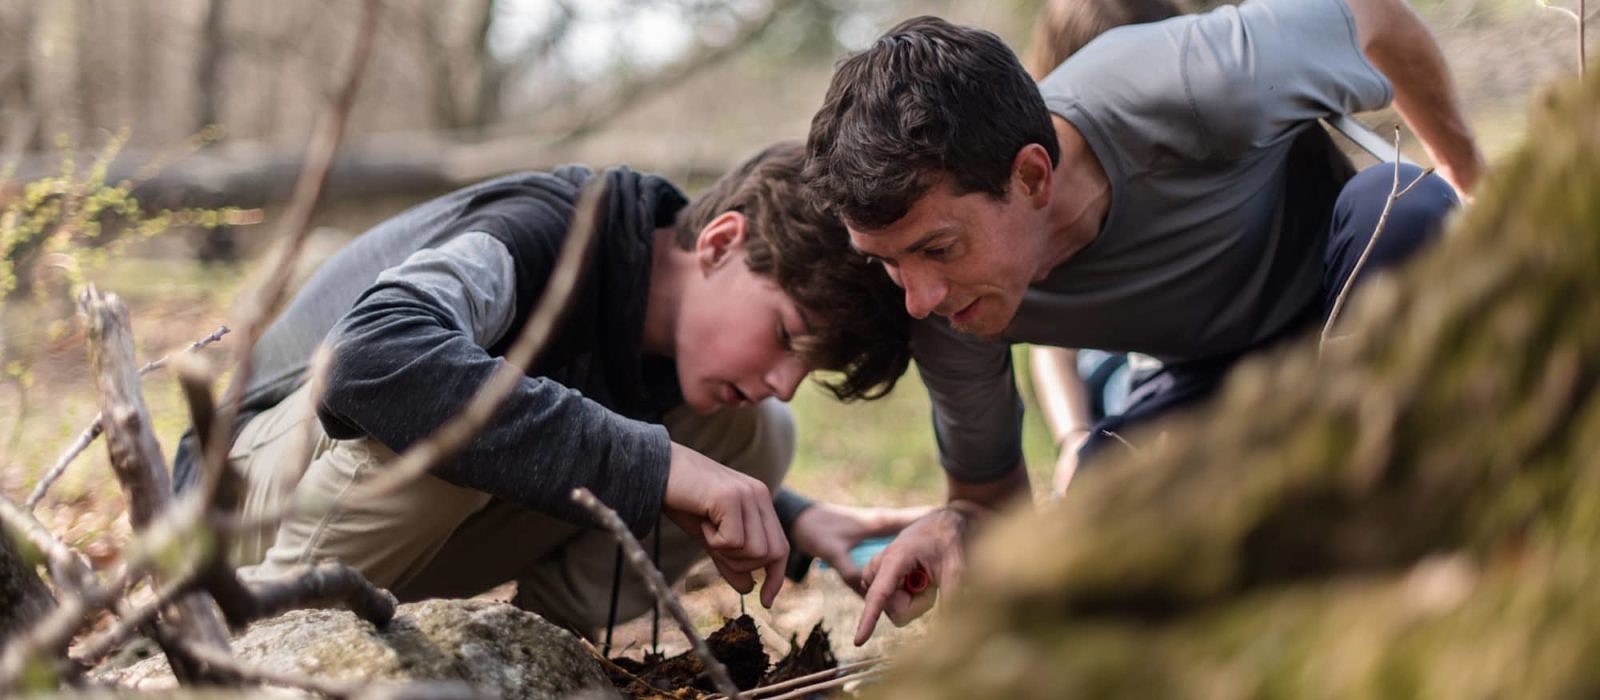 A pair of naturalists investigates leaf litter in the Harris Center woods. (photo © Ben Conant)